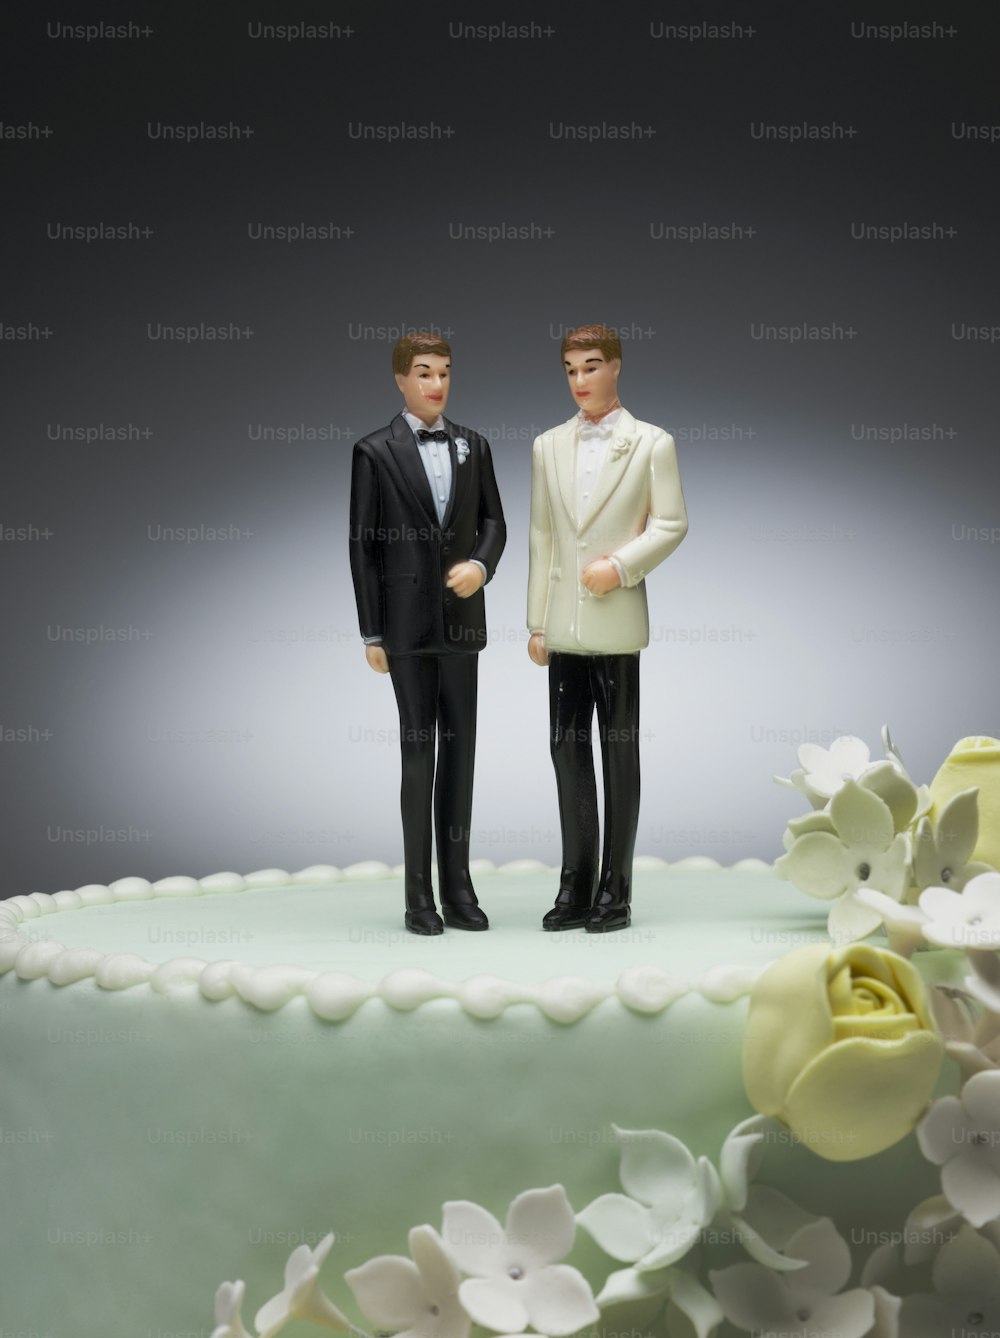 a couple of figurines standing on top of a cake